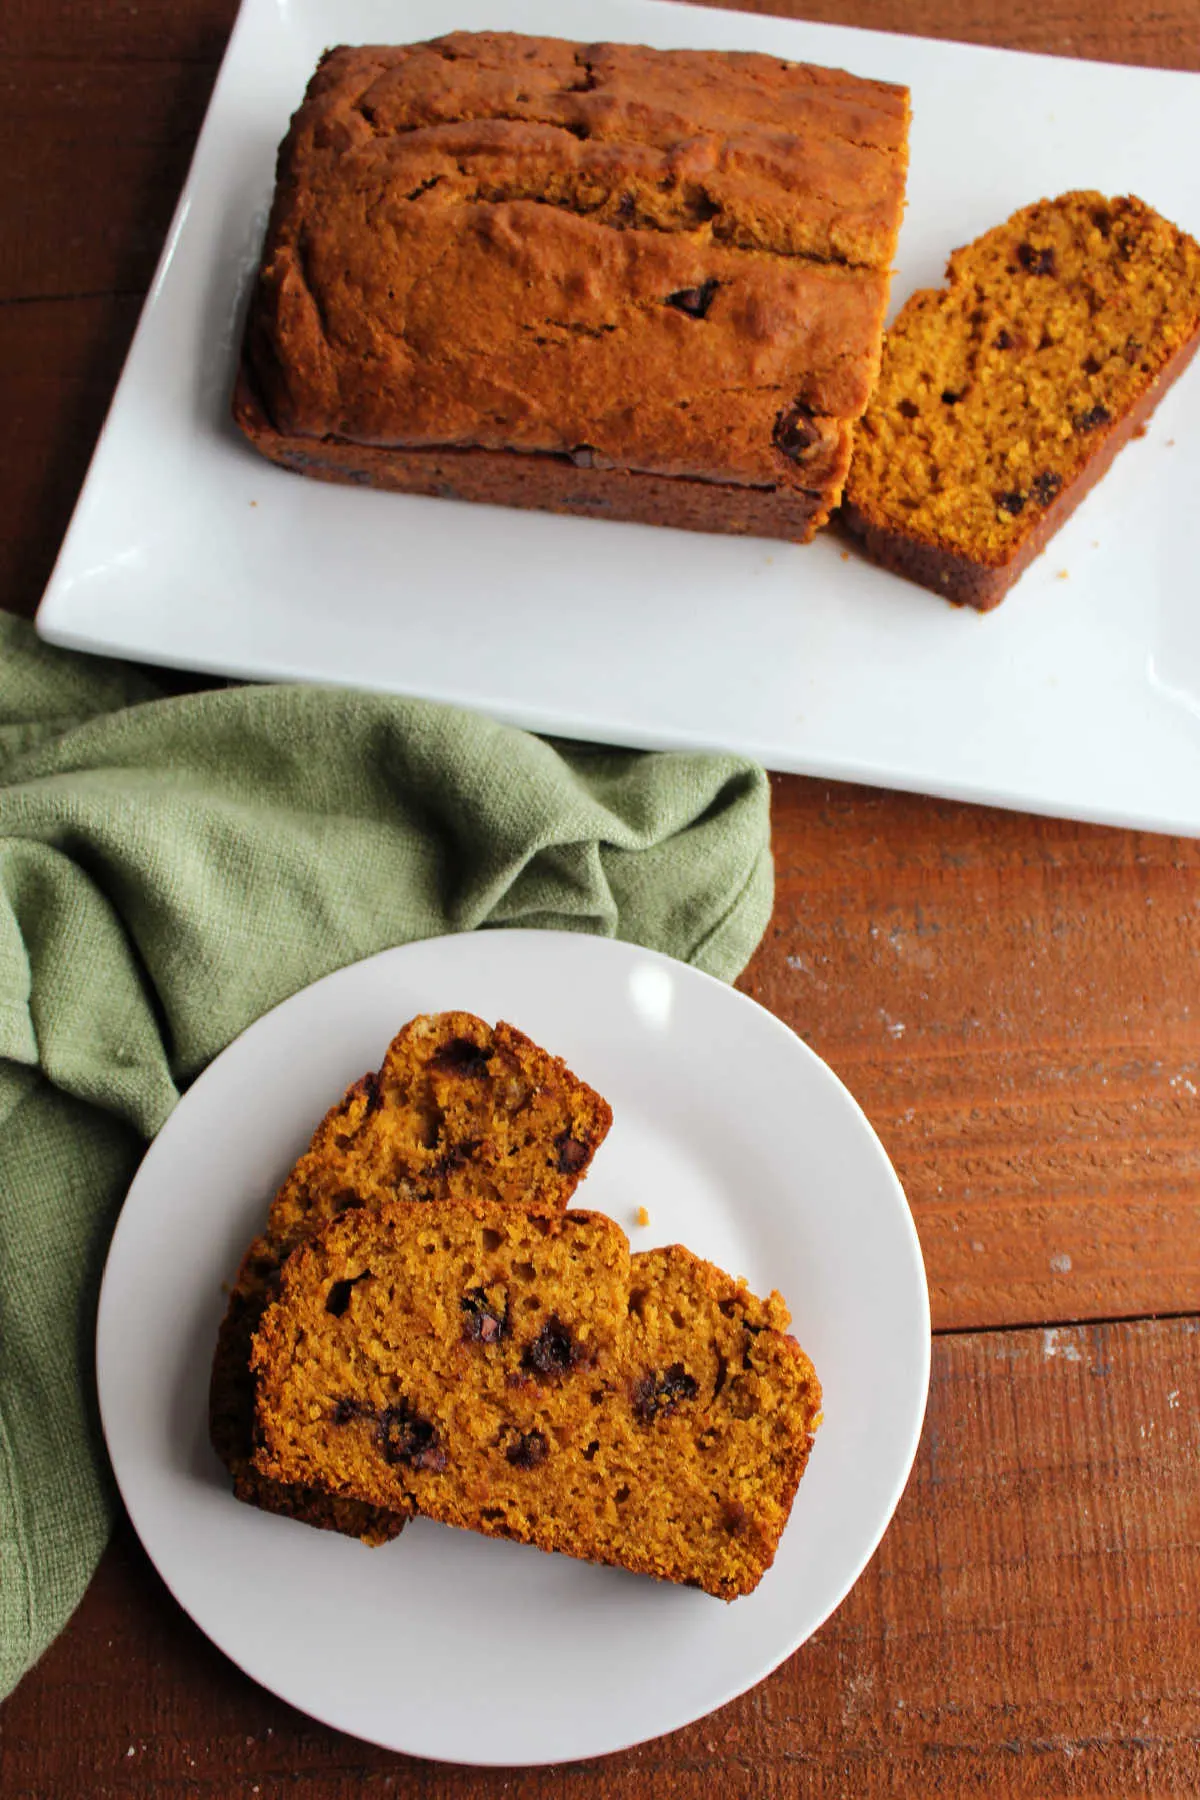 Slices of pumpkin chocolate chip bread on plate with remaining loaf on platter in the background.